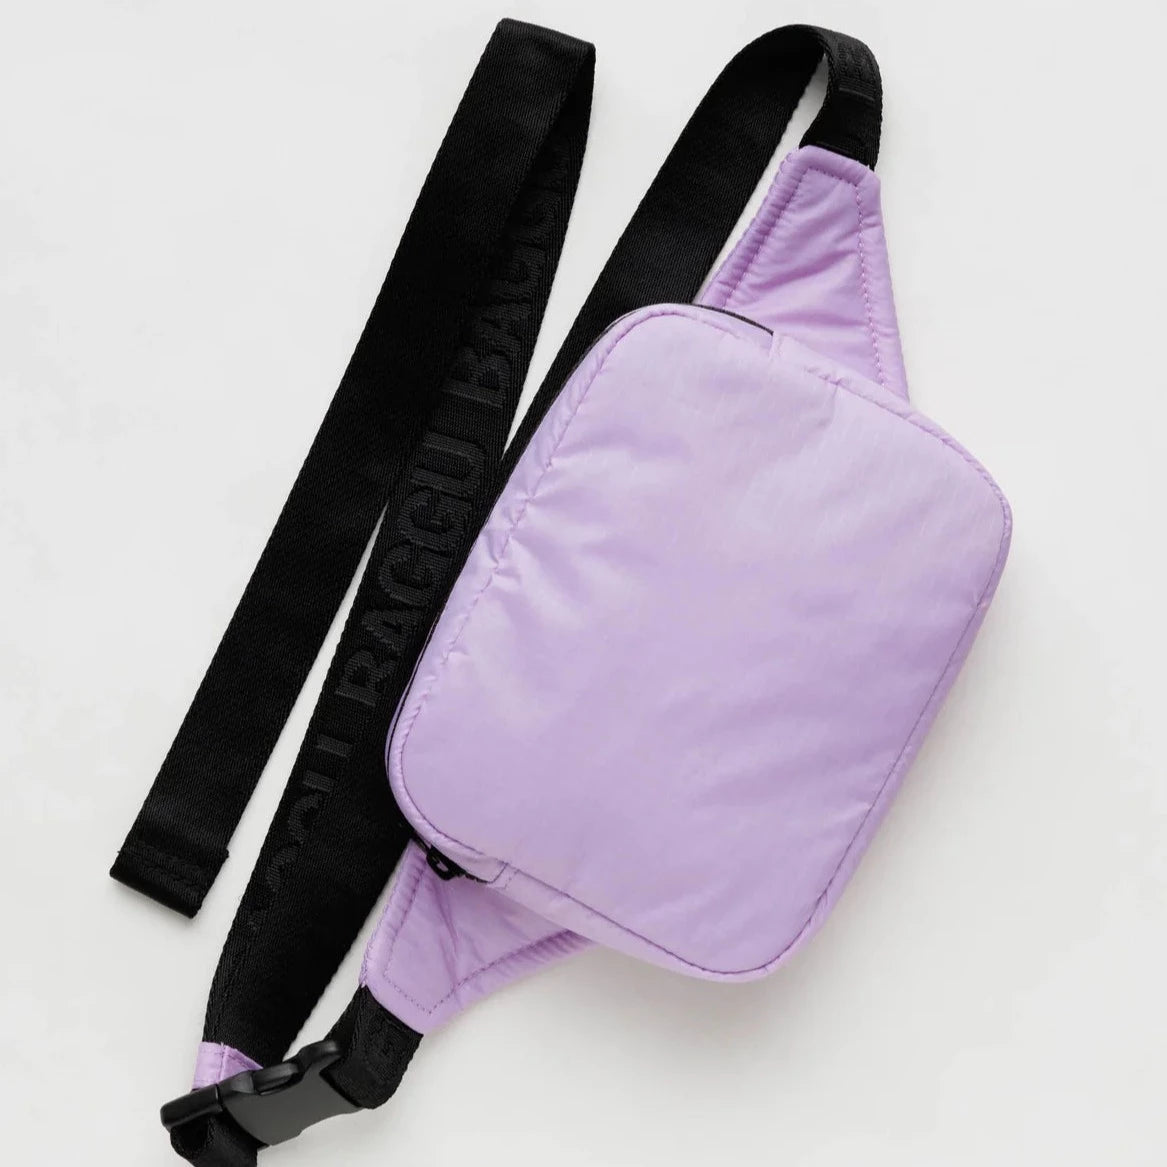 Lilac Fanny Pack with Black De-bossed Strap with "BAGGU" Text